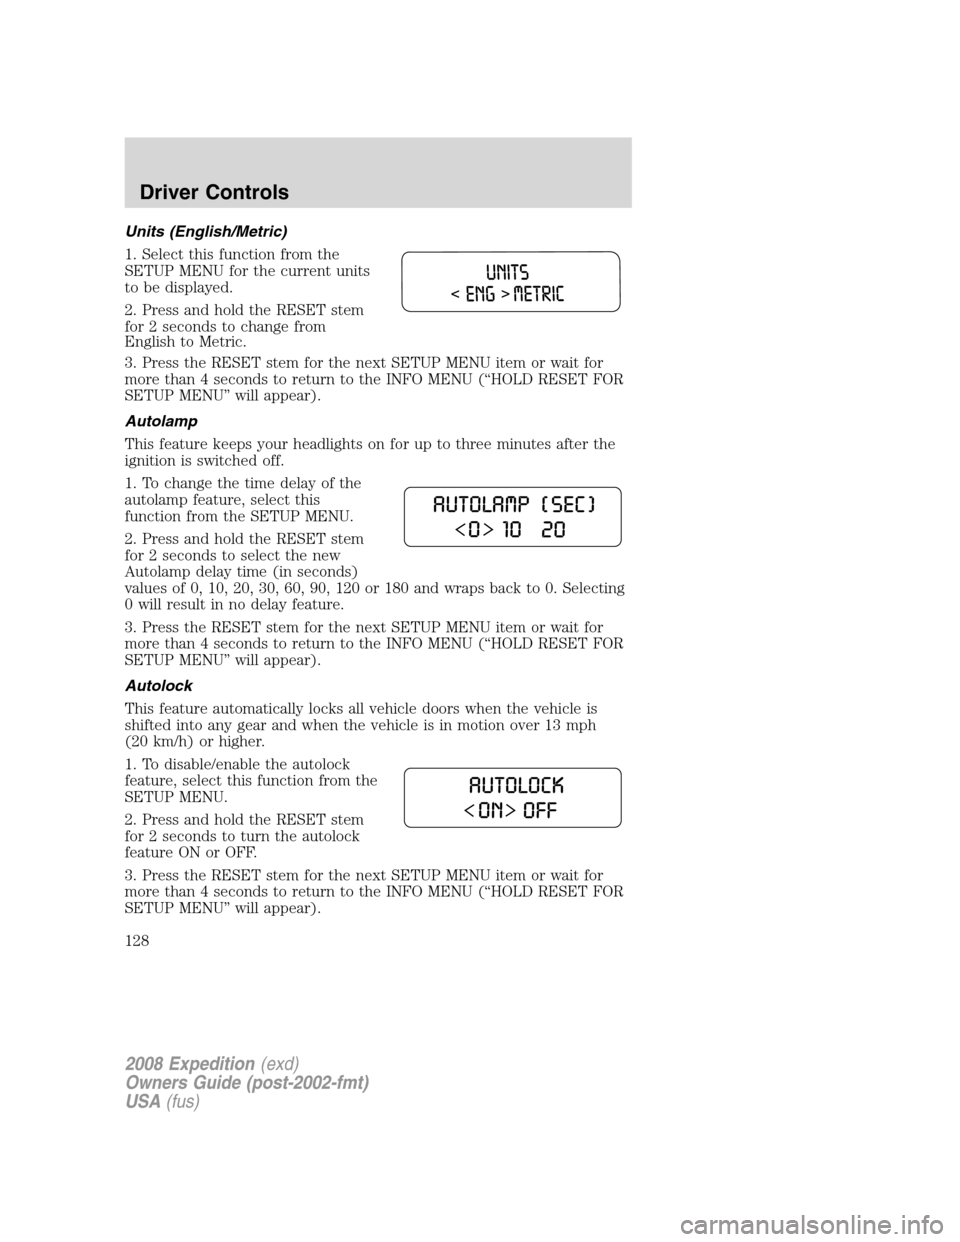 FORD EXPEDITION 2008 3.G Owners Manual Units (English/Metric)
1. Select this function from the
SETUP MENU for the current units
to be displayed.
2. Press and hold the RESET stem
for 2 seconds to change from
English to Metric.
3. Press the 